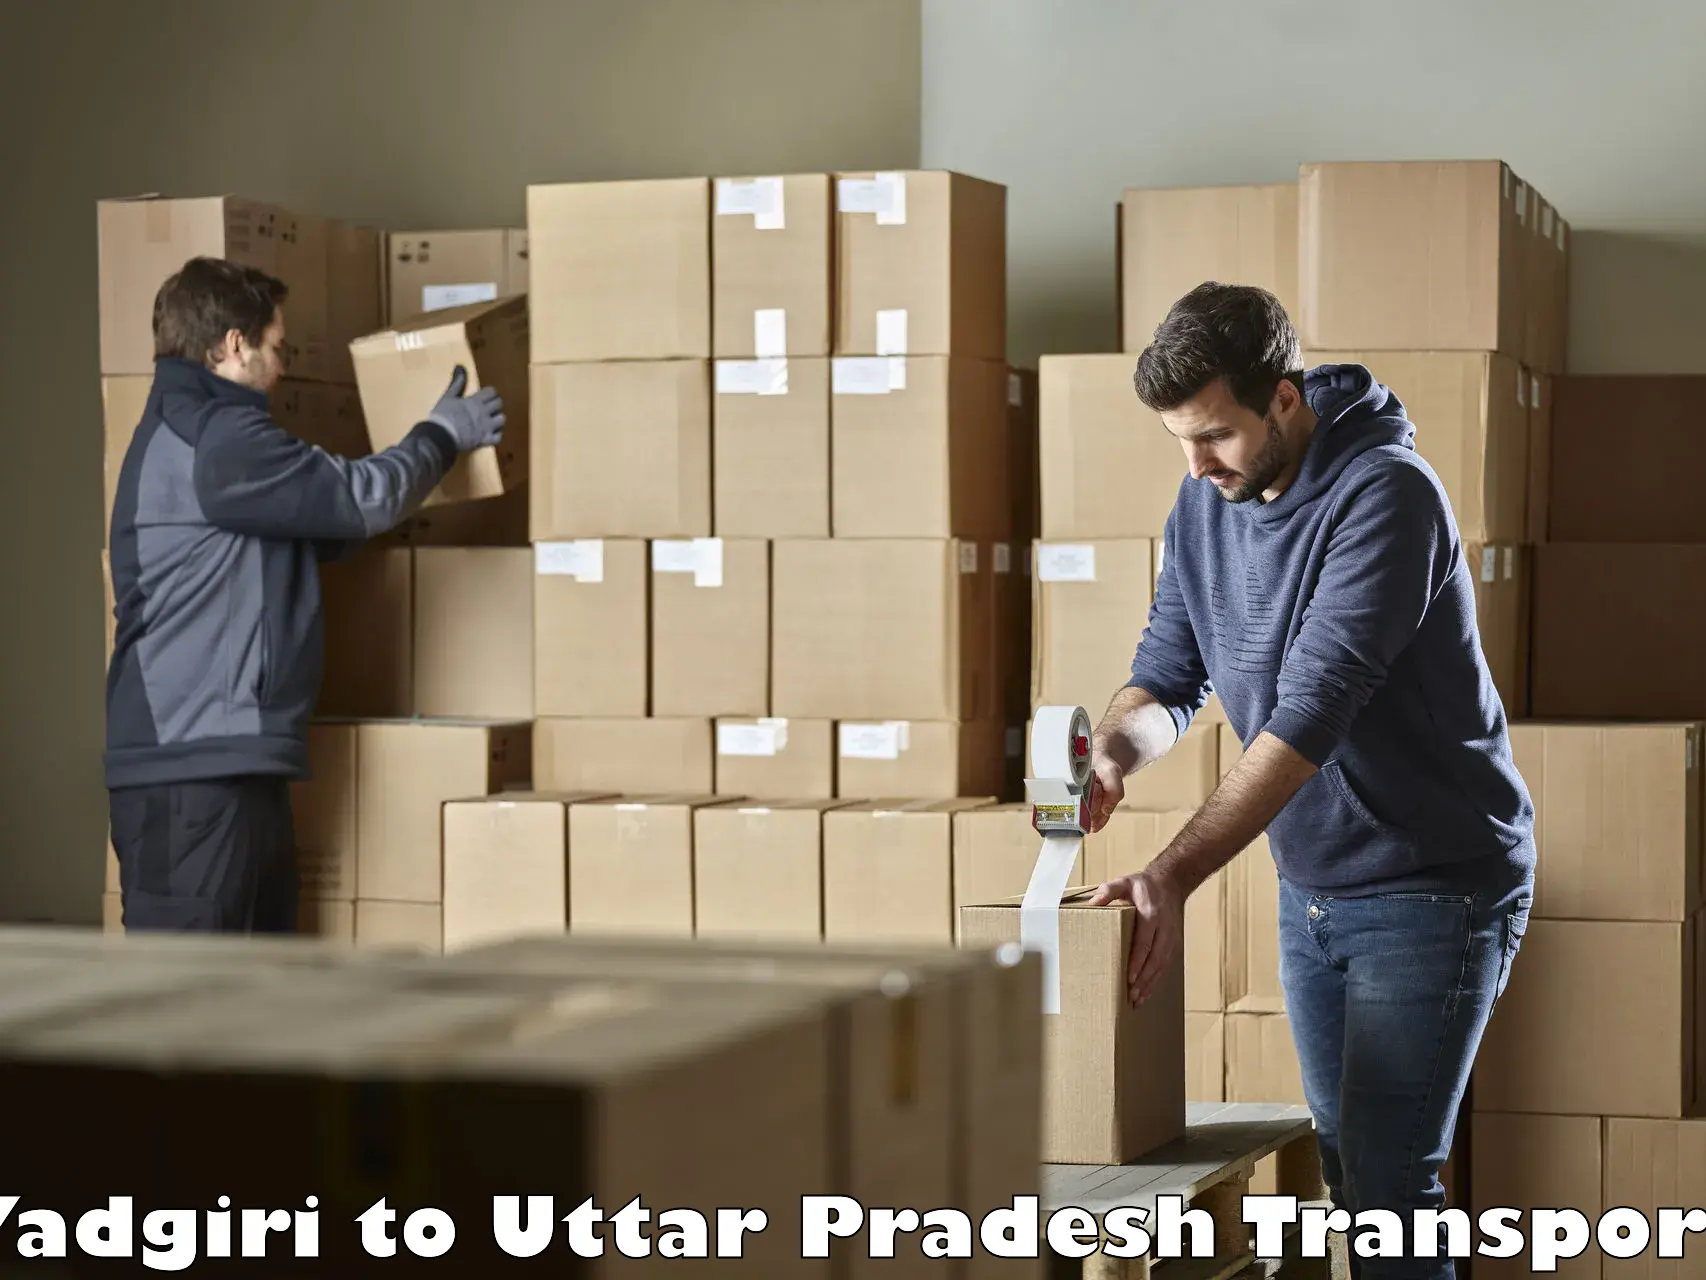 Goods delivery service Yadgiri to Bhathat